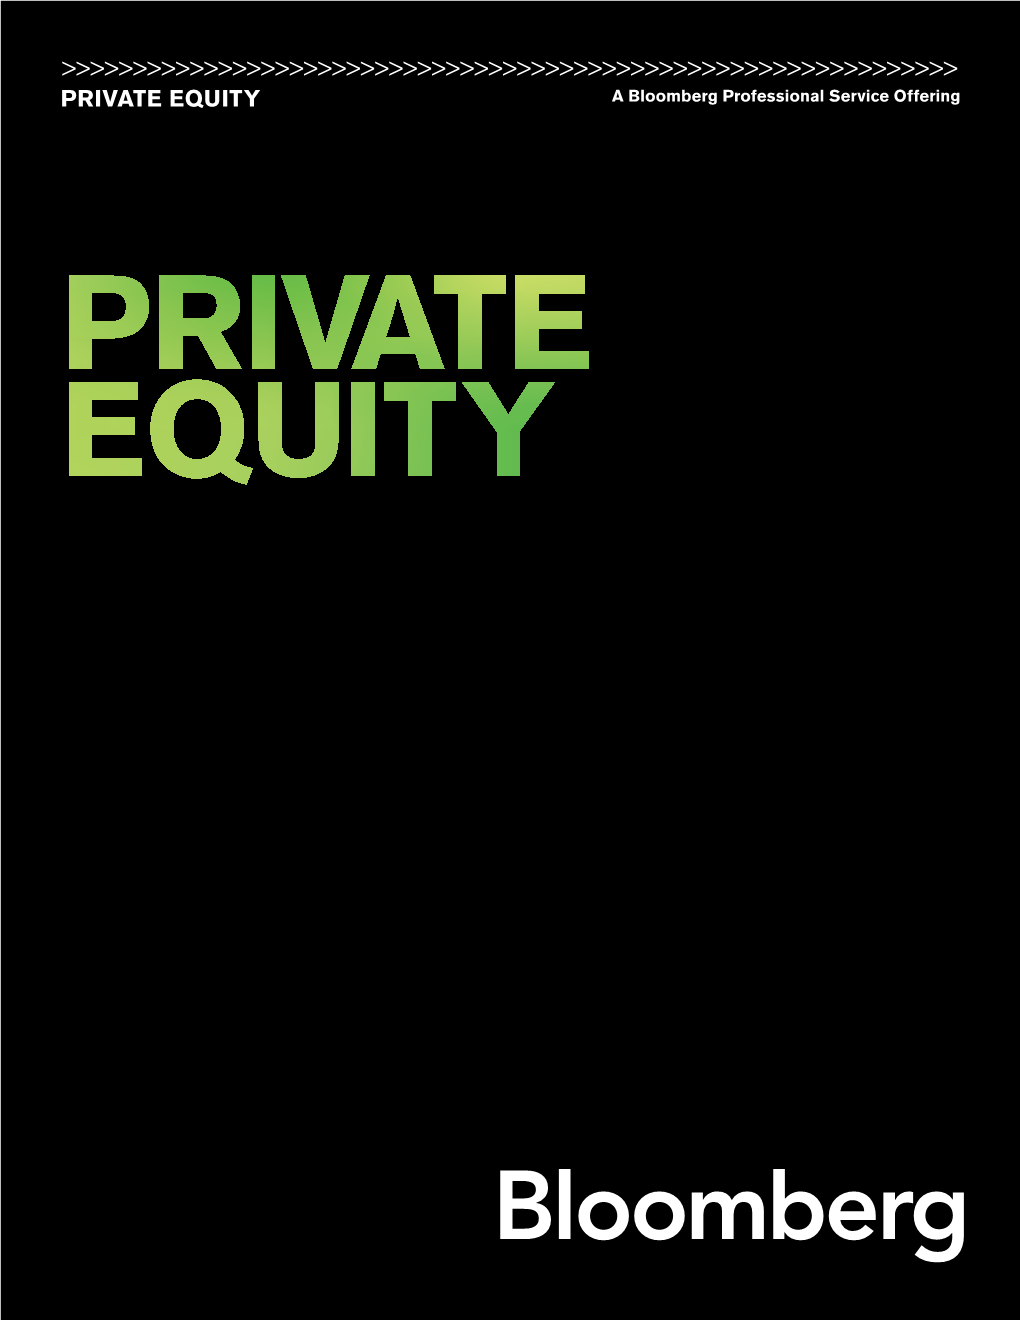 PRIVATE EQUITY a Bloomberg Professional Service Offering CONTENTS